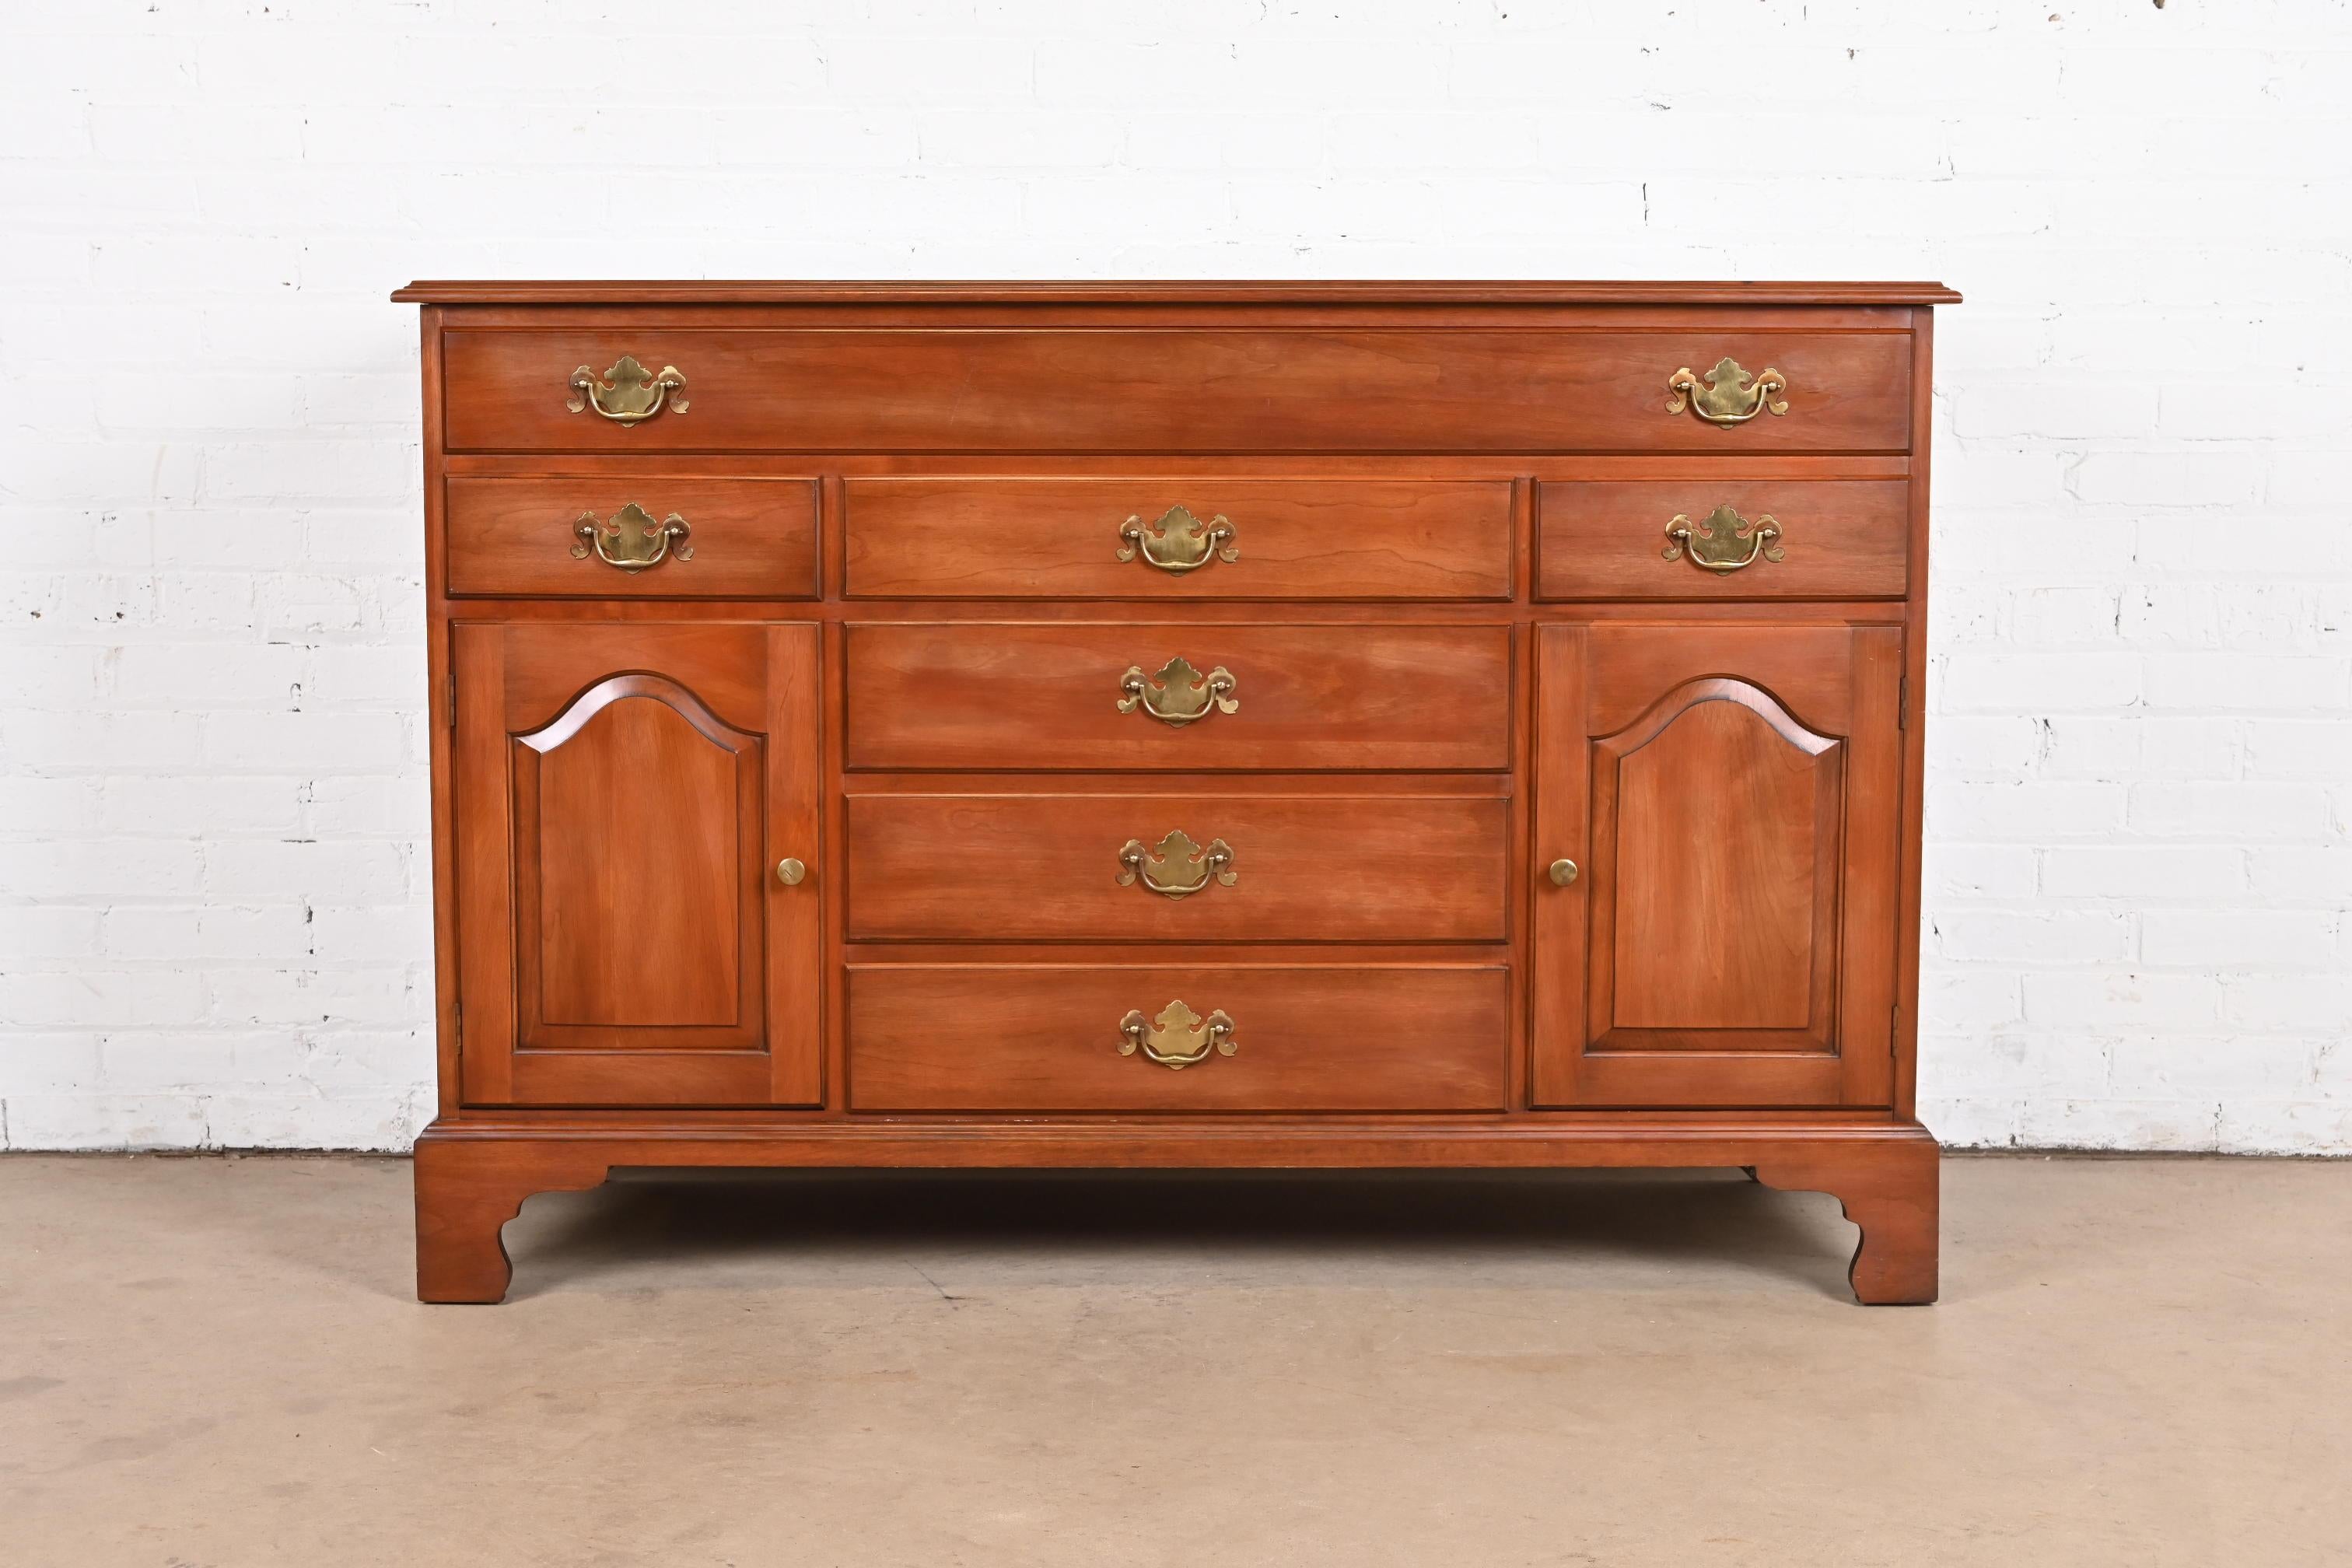 A gorgeous American Colonial or Chippendale style sideboard, buffet server, or bar cabinet

By Henkel Harris

USA, Circa 1970s

Solid wild black cherry wood, with original brass hardware.

Measures: 54